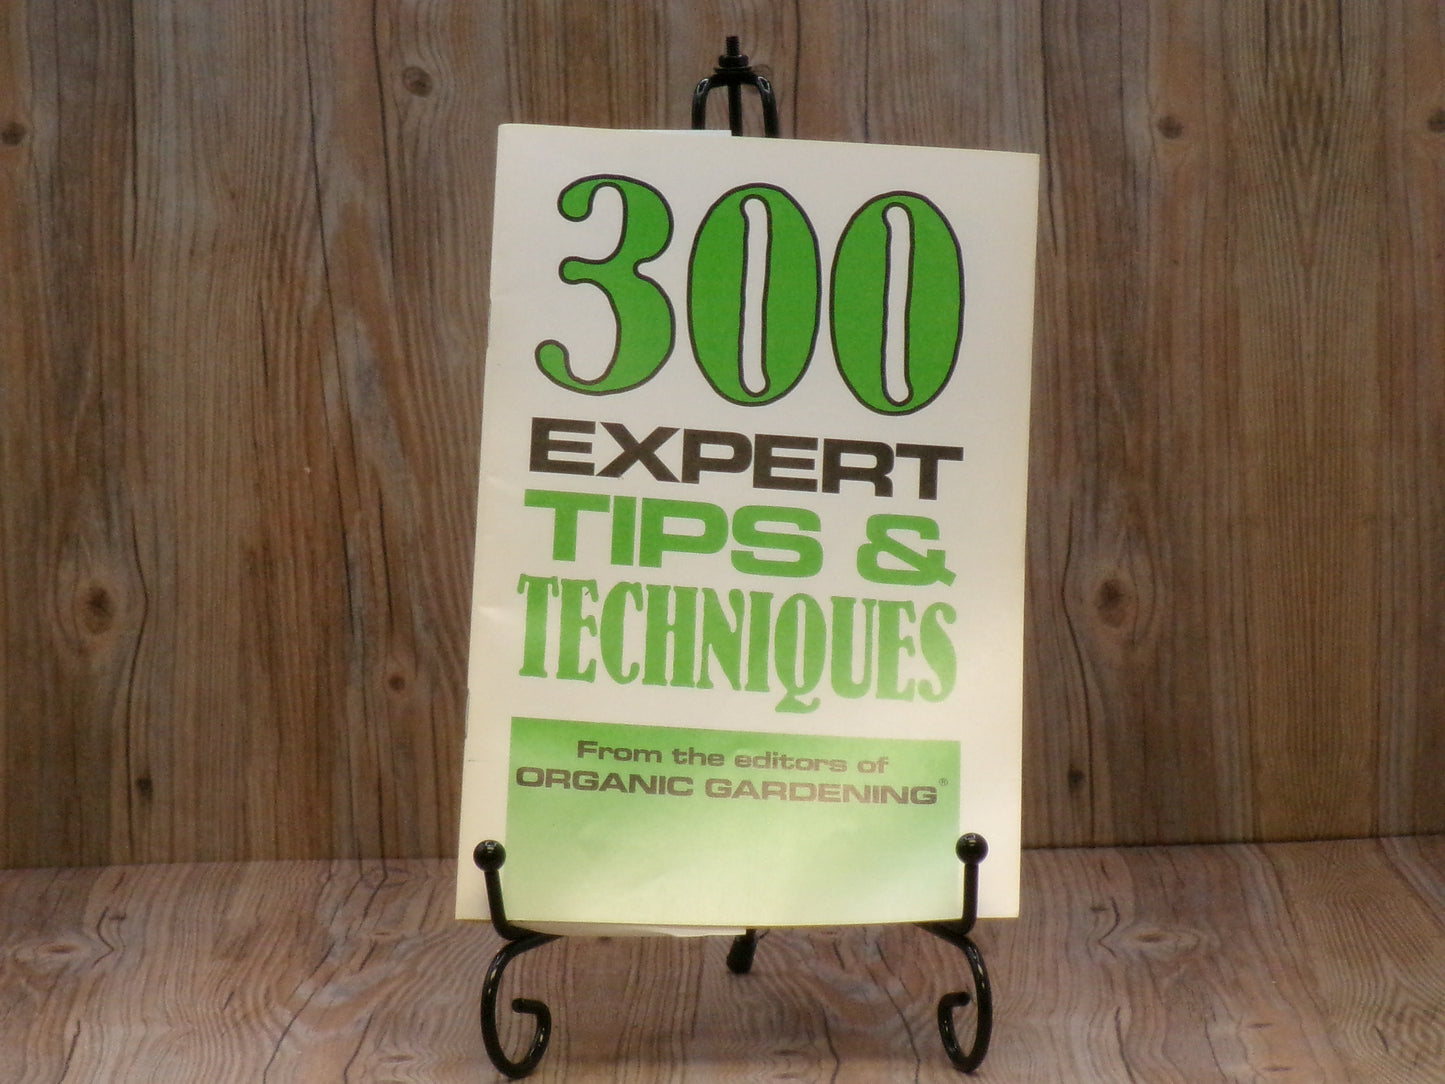 300 Expert Tips and Techniques by John Lotte